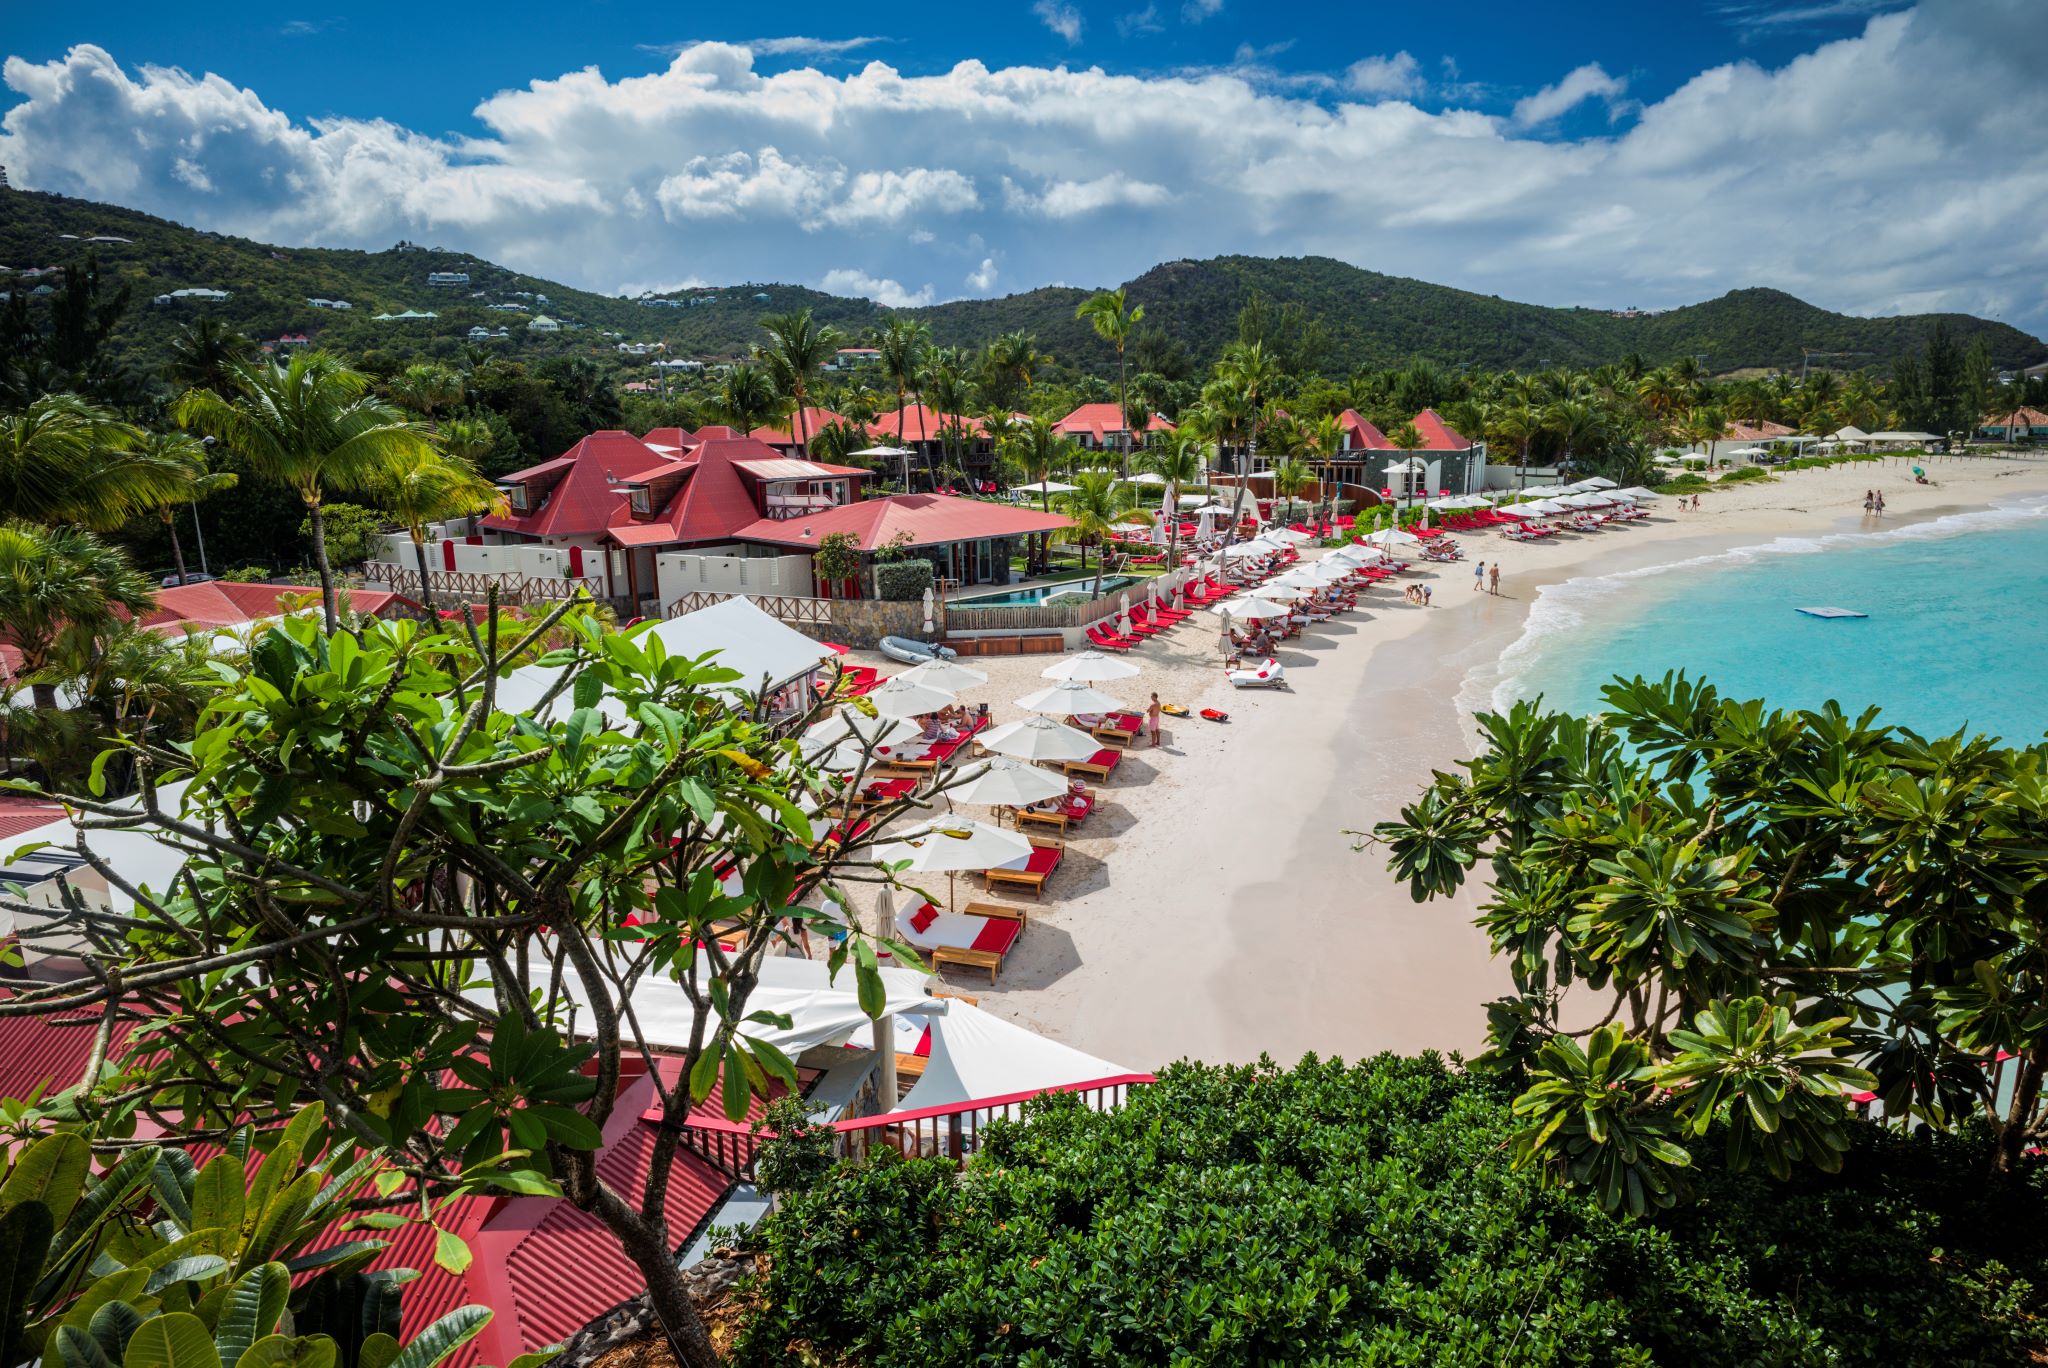 St. Barts Hotels, Beaches, and Budget-Friendly Spots